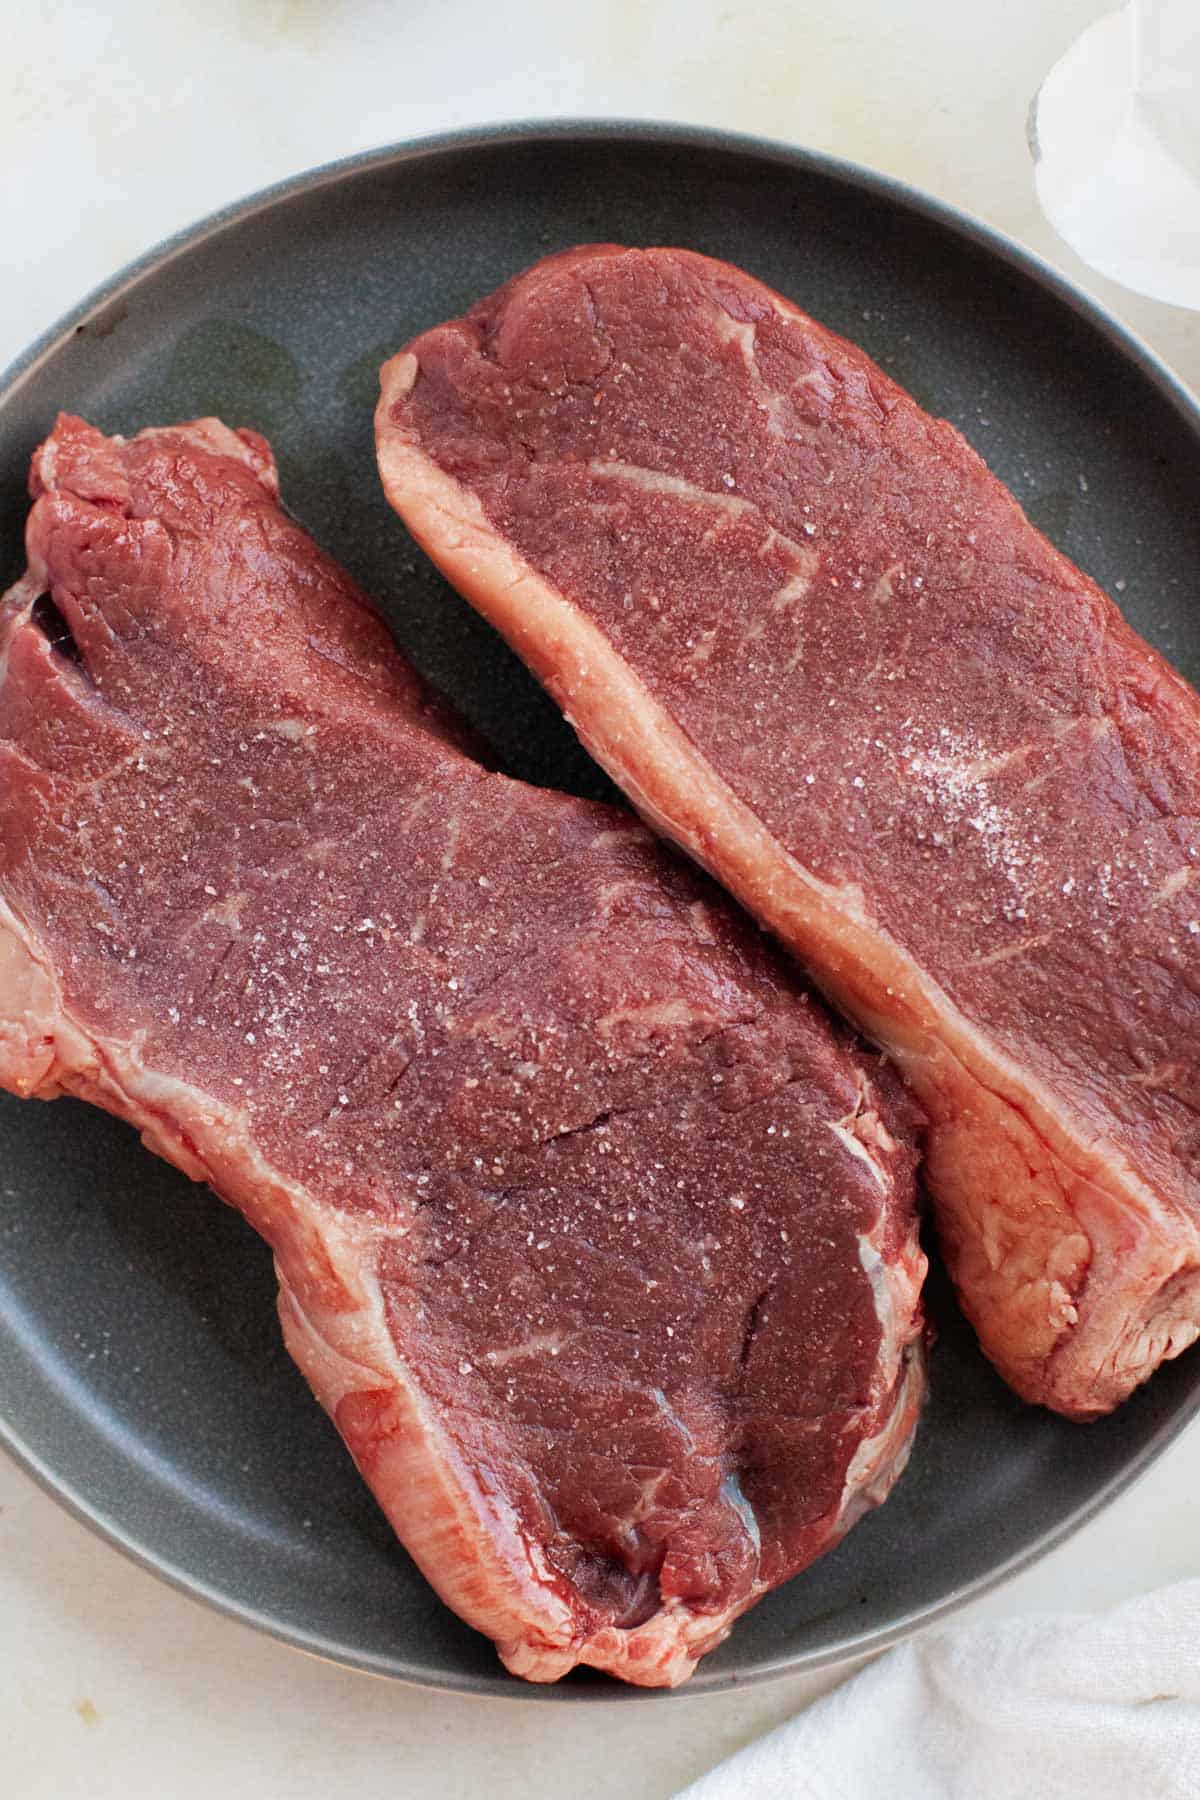 Two steaks on a plate sprinkled with salt.